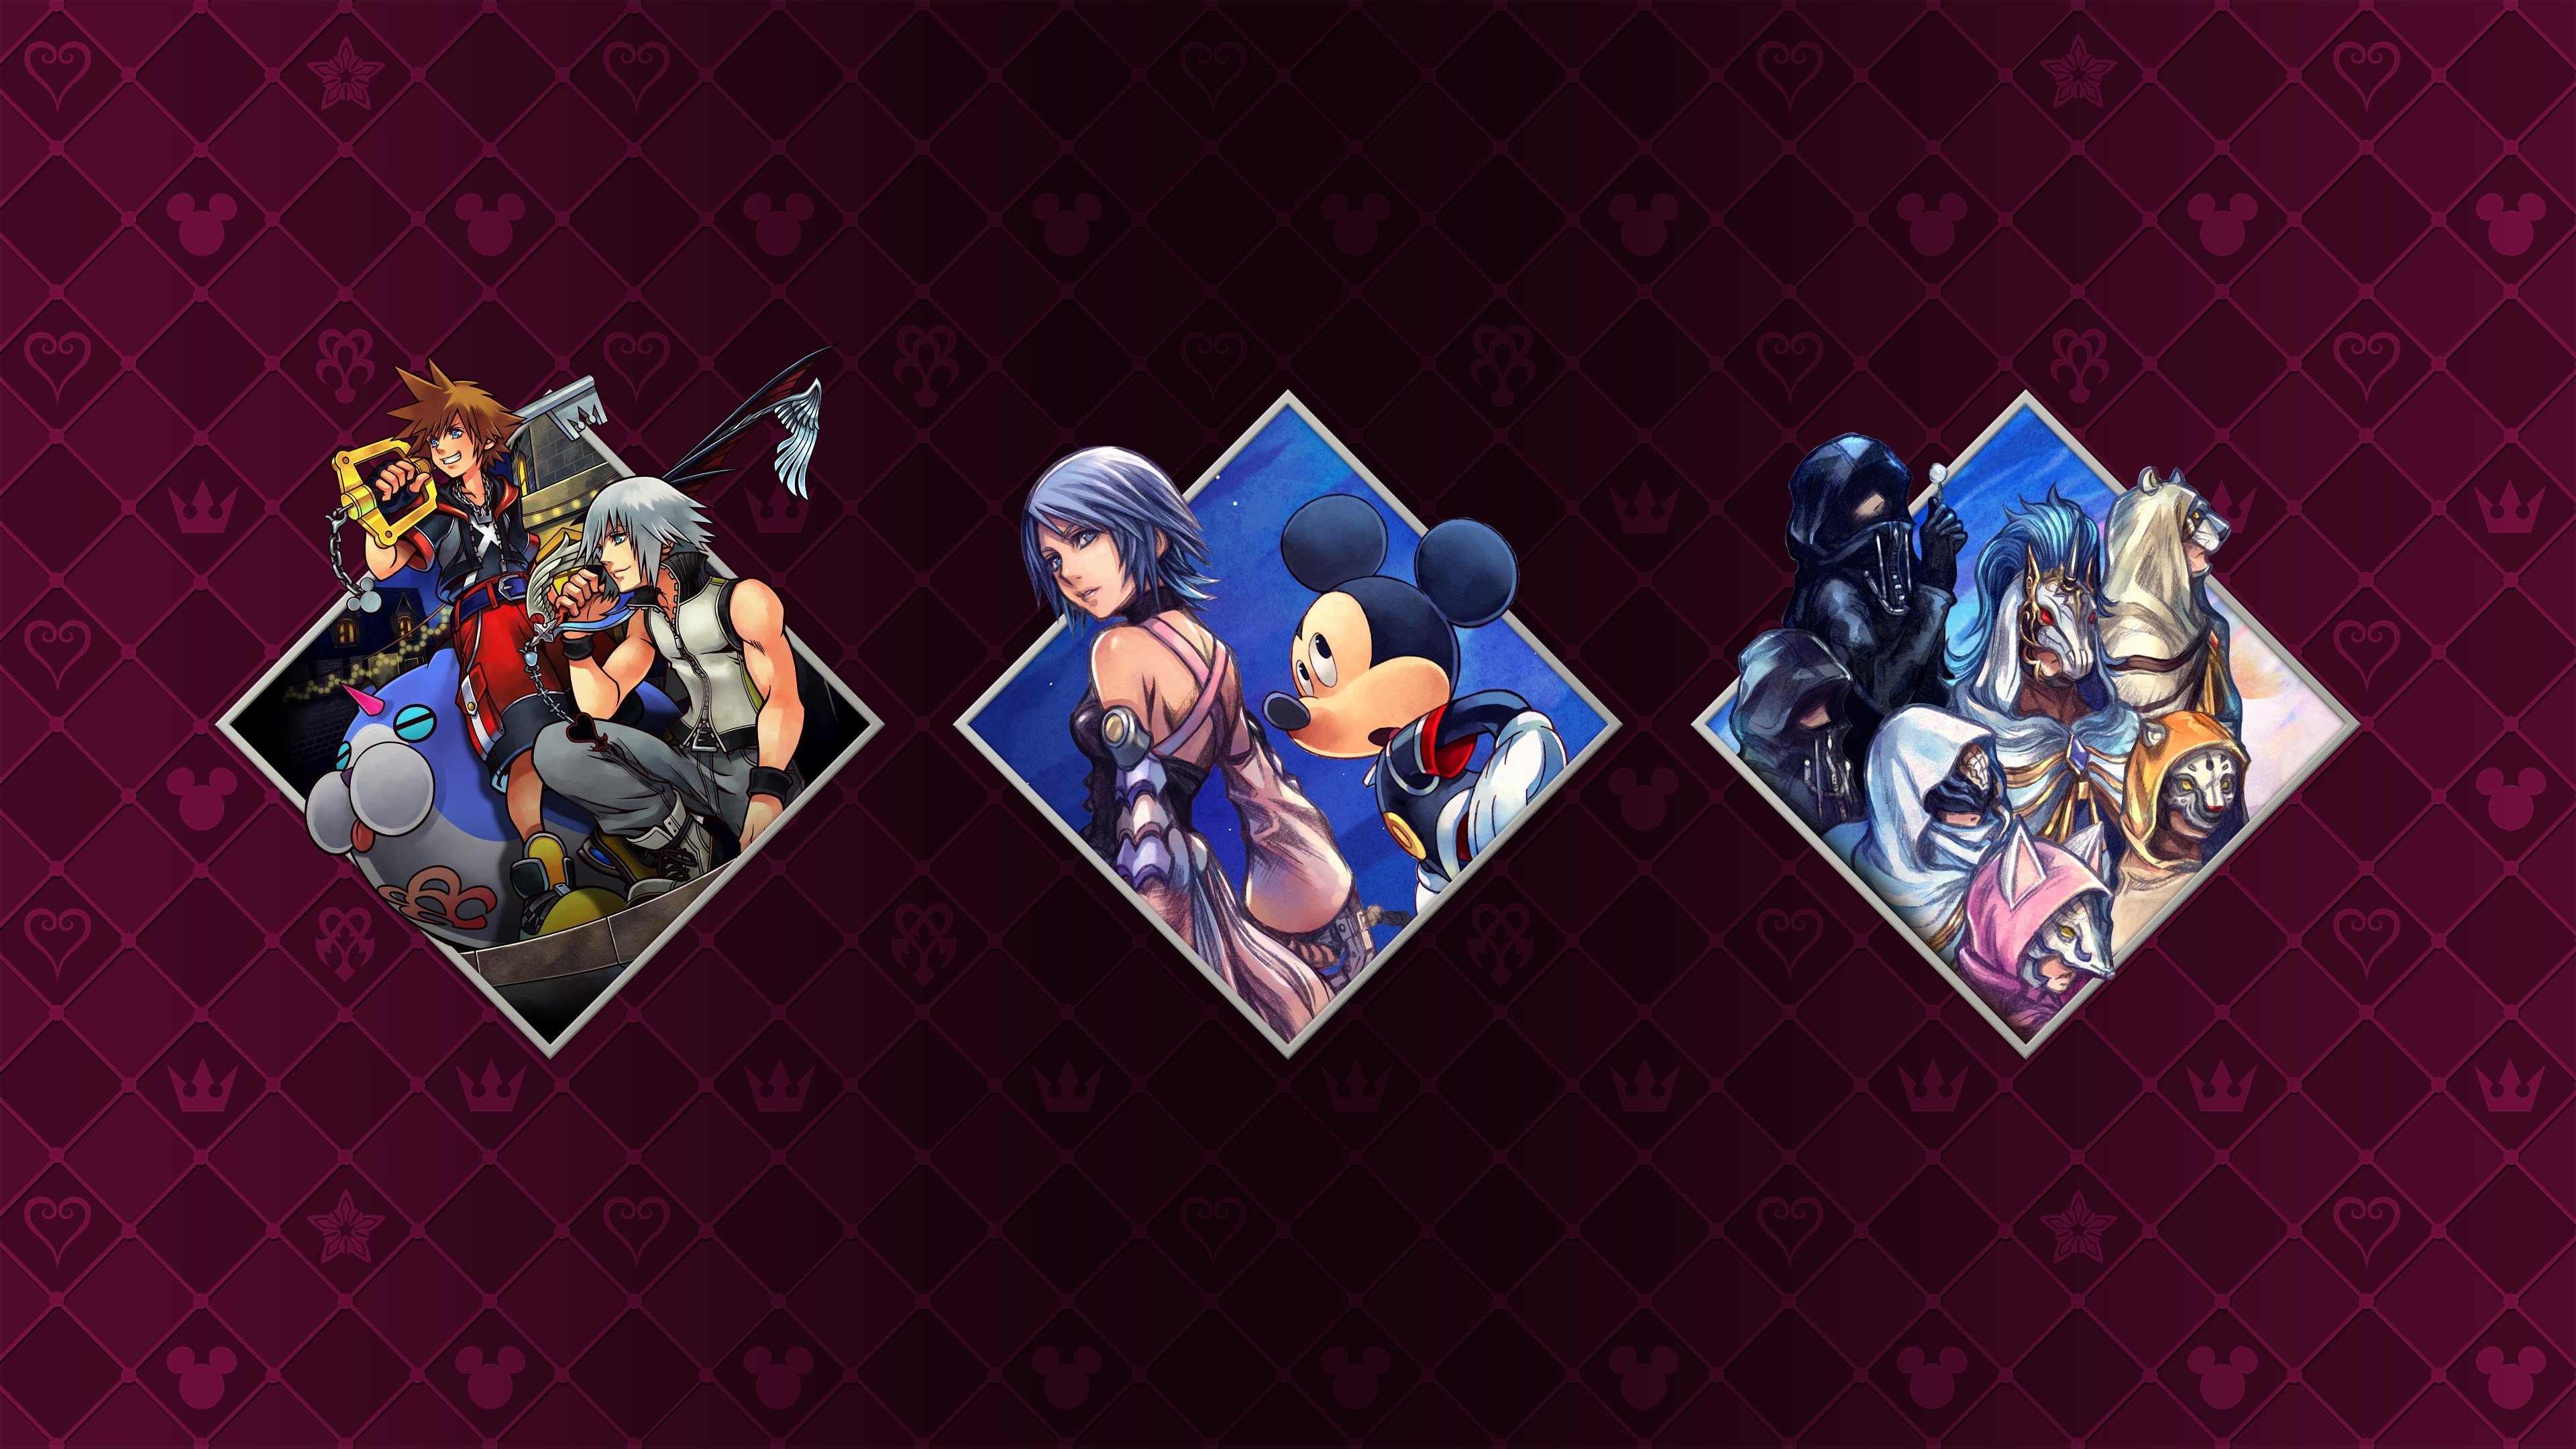 KINGDOM HEARTS HD 2.8 Final Chapter Prologue cover image